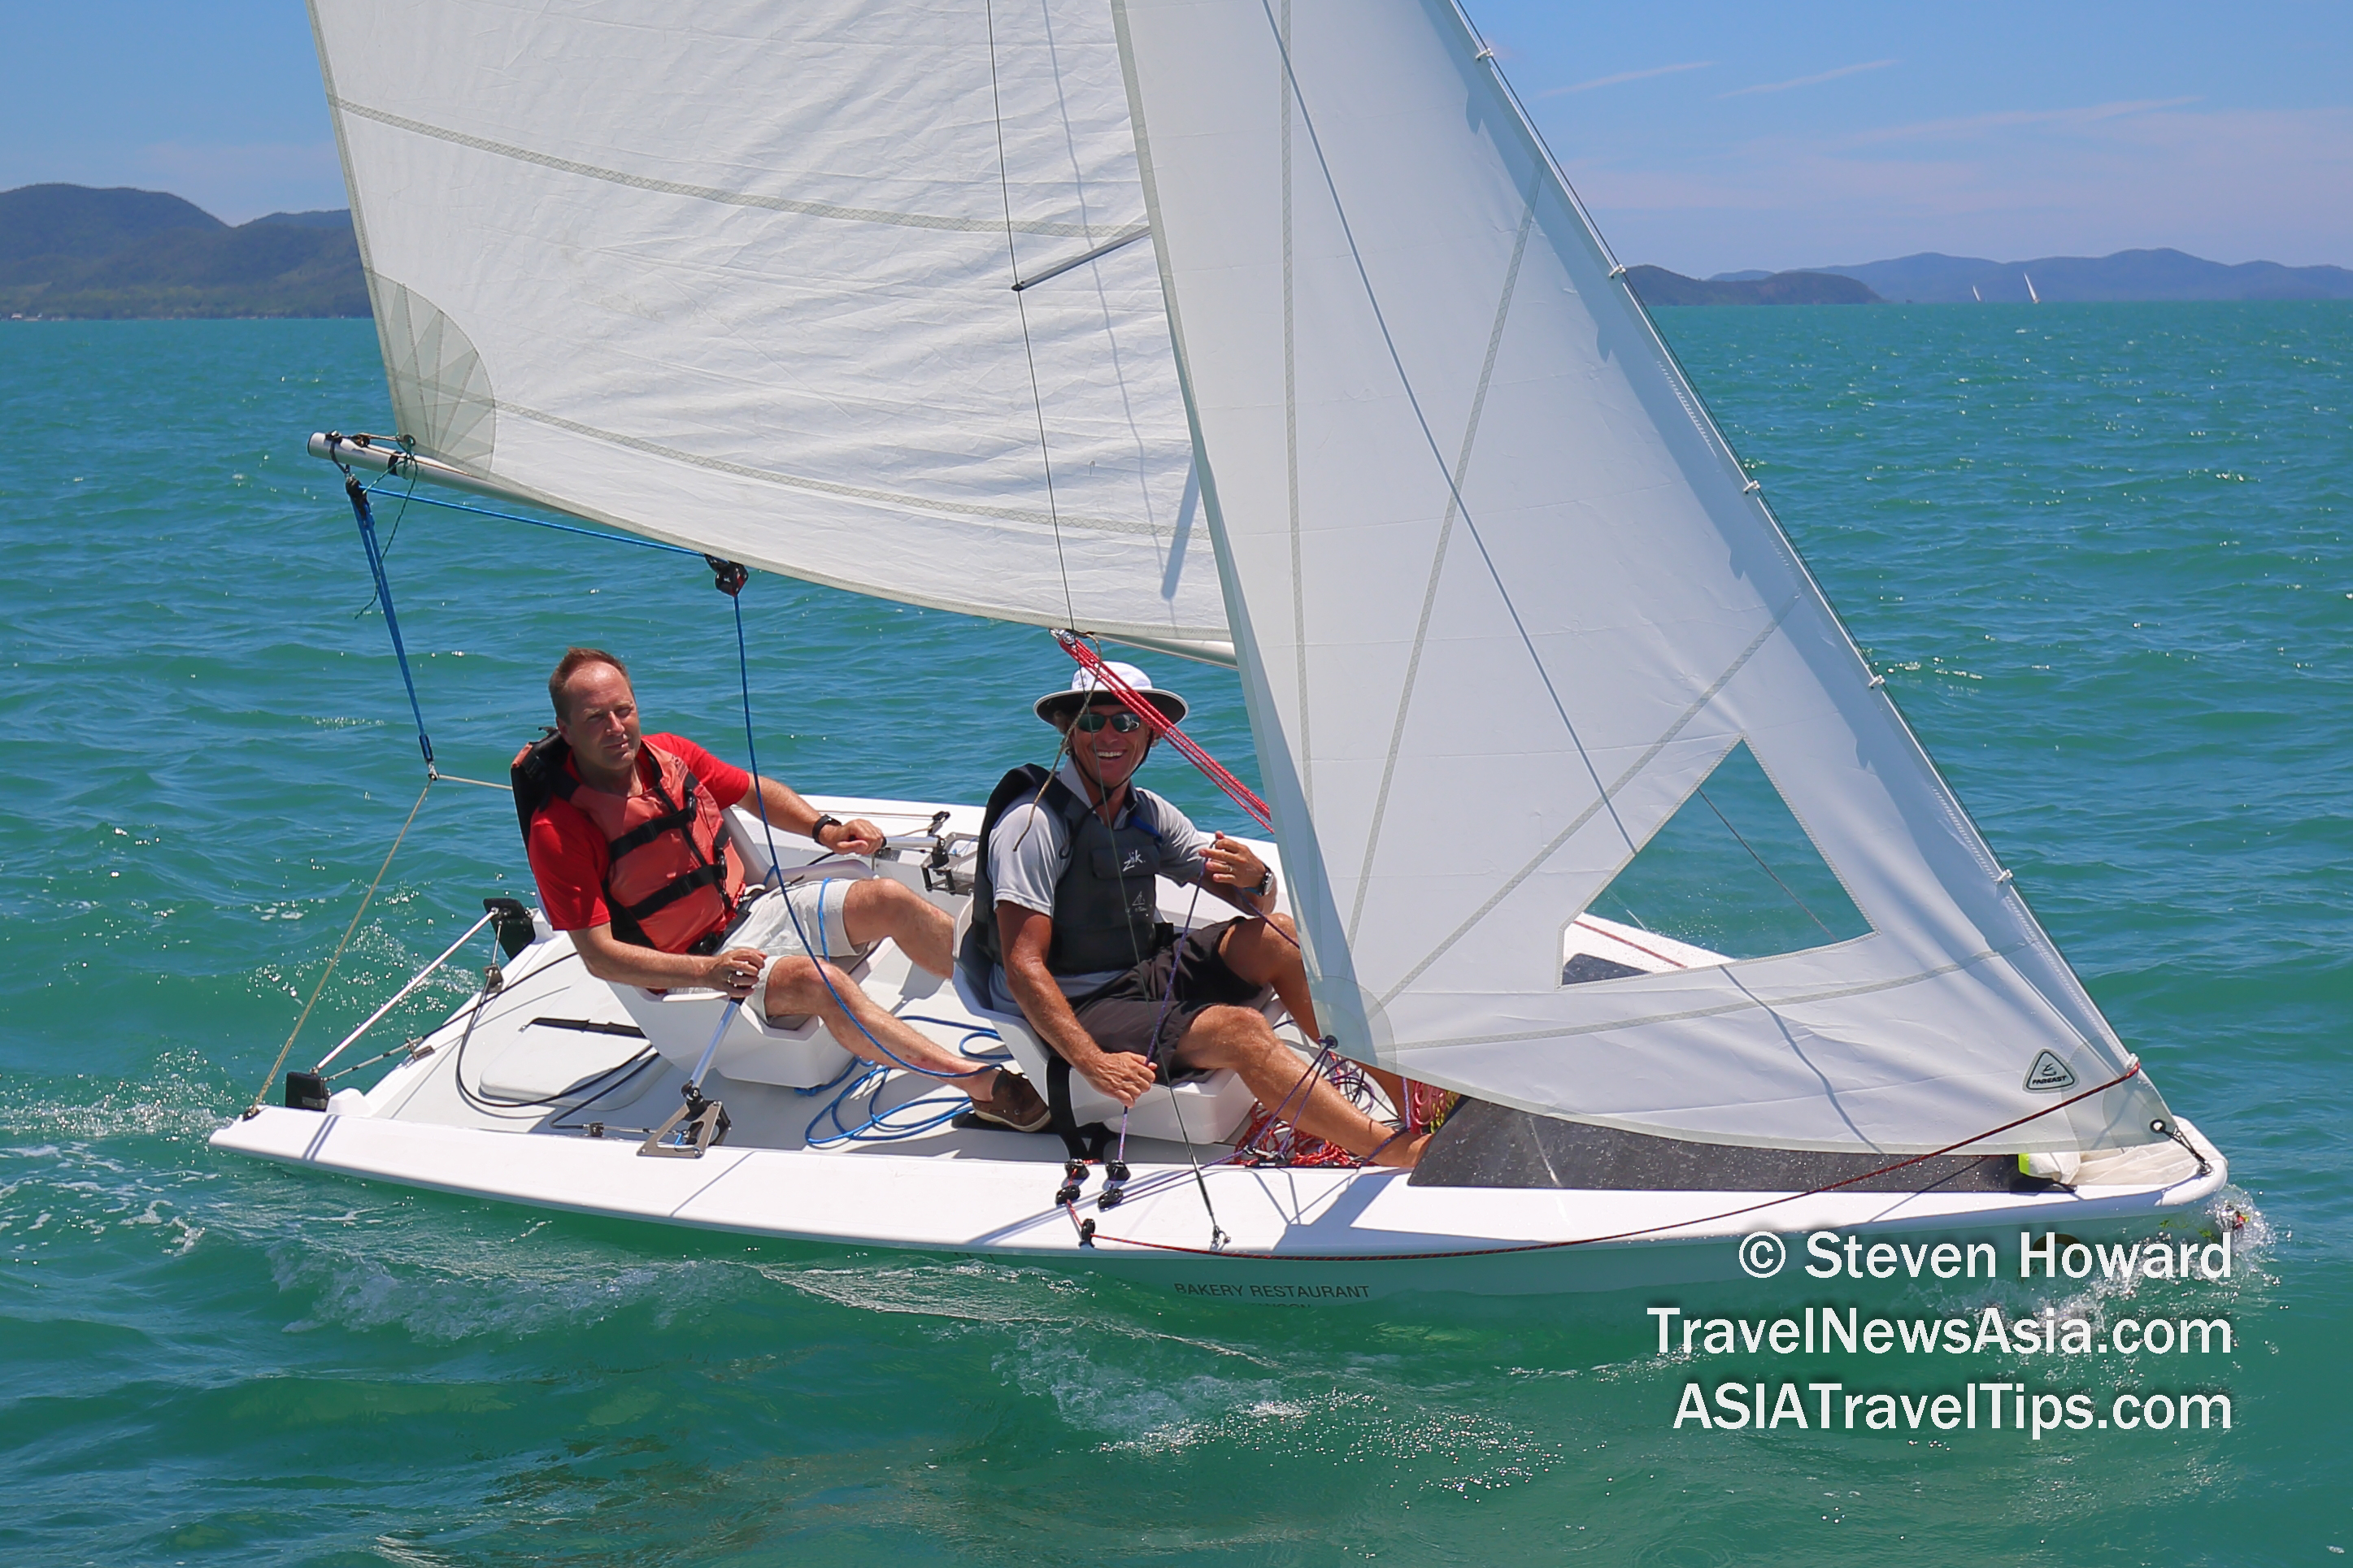 Maarten Voogd enjoying the S\V14 Two-Person Dinghy that he and his company - Simonis Voogd Yacht Design - helped to create. Maarten was in Pattaya, Thailand to attend the 15th annual Top of the Gulf Regatta where the S\V14 Two-Person Dinghy will be racing for the first time. Picture by Steven Howard of TravelNewsAsia.com Click to enlarge.